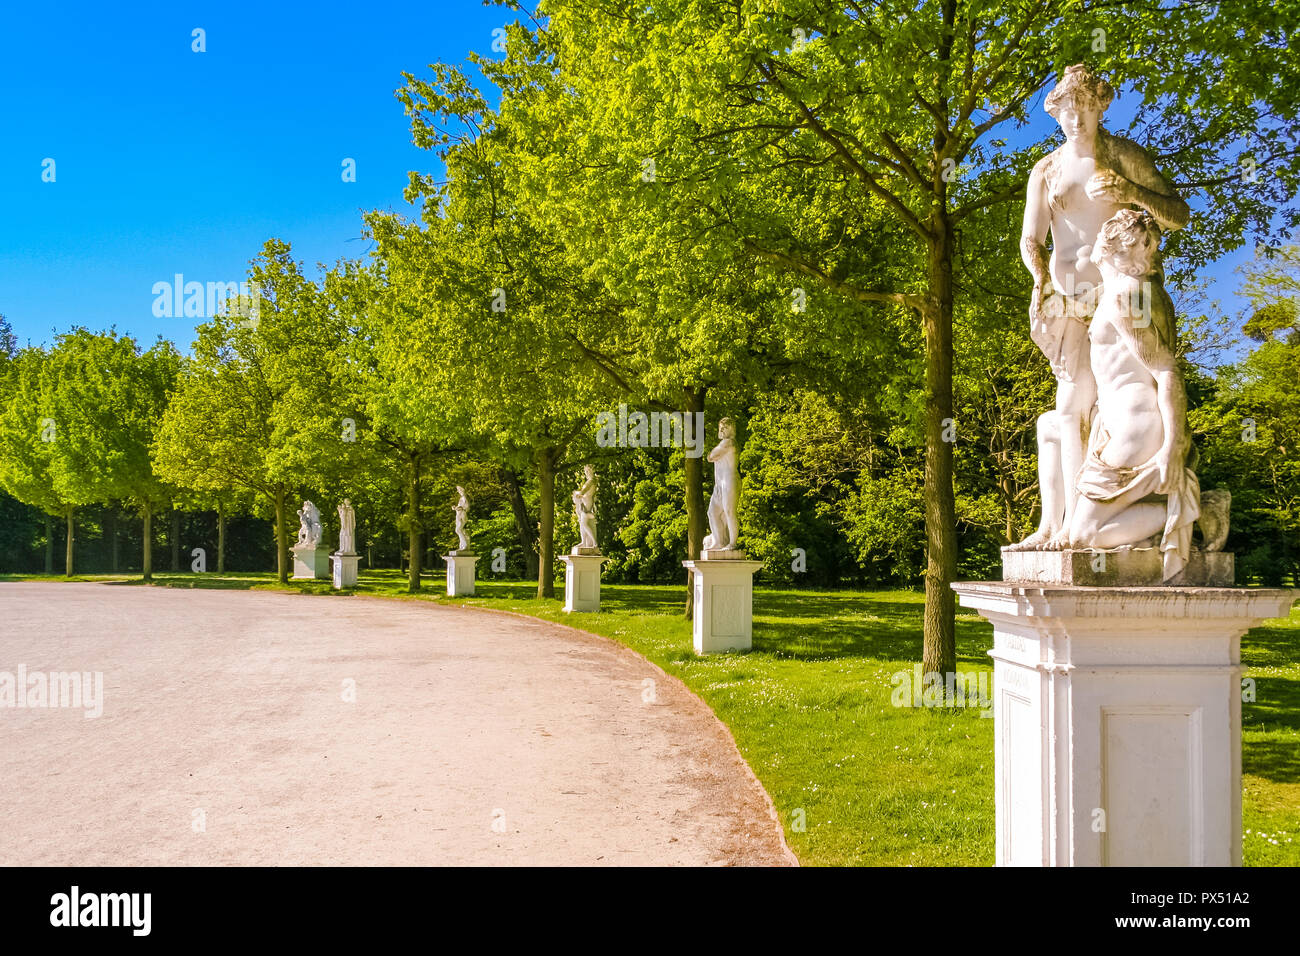 Six white baroque sculptures of men and women on pedestals at a curved road in the Karlsaue park in Kassel, Germany on a sunny spring day with nice... Stock Photo